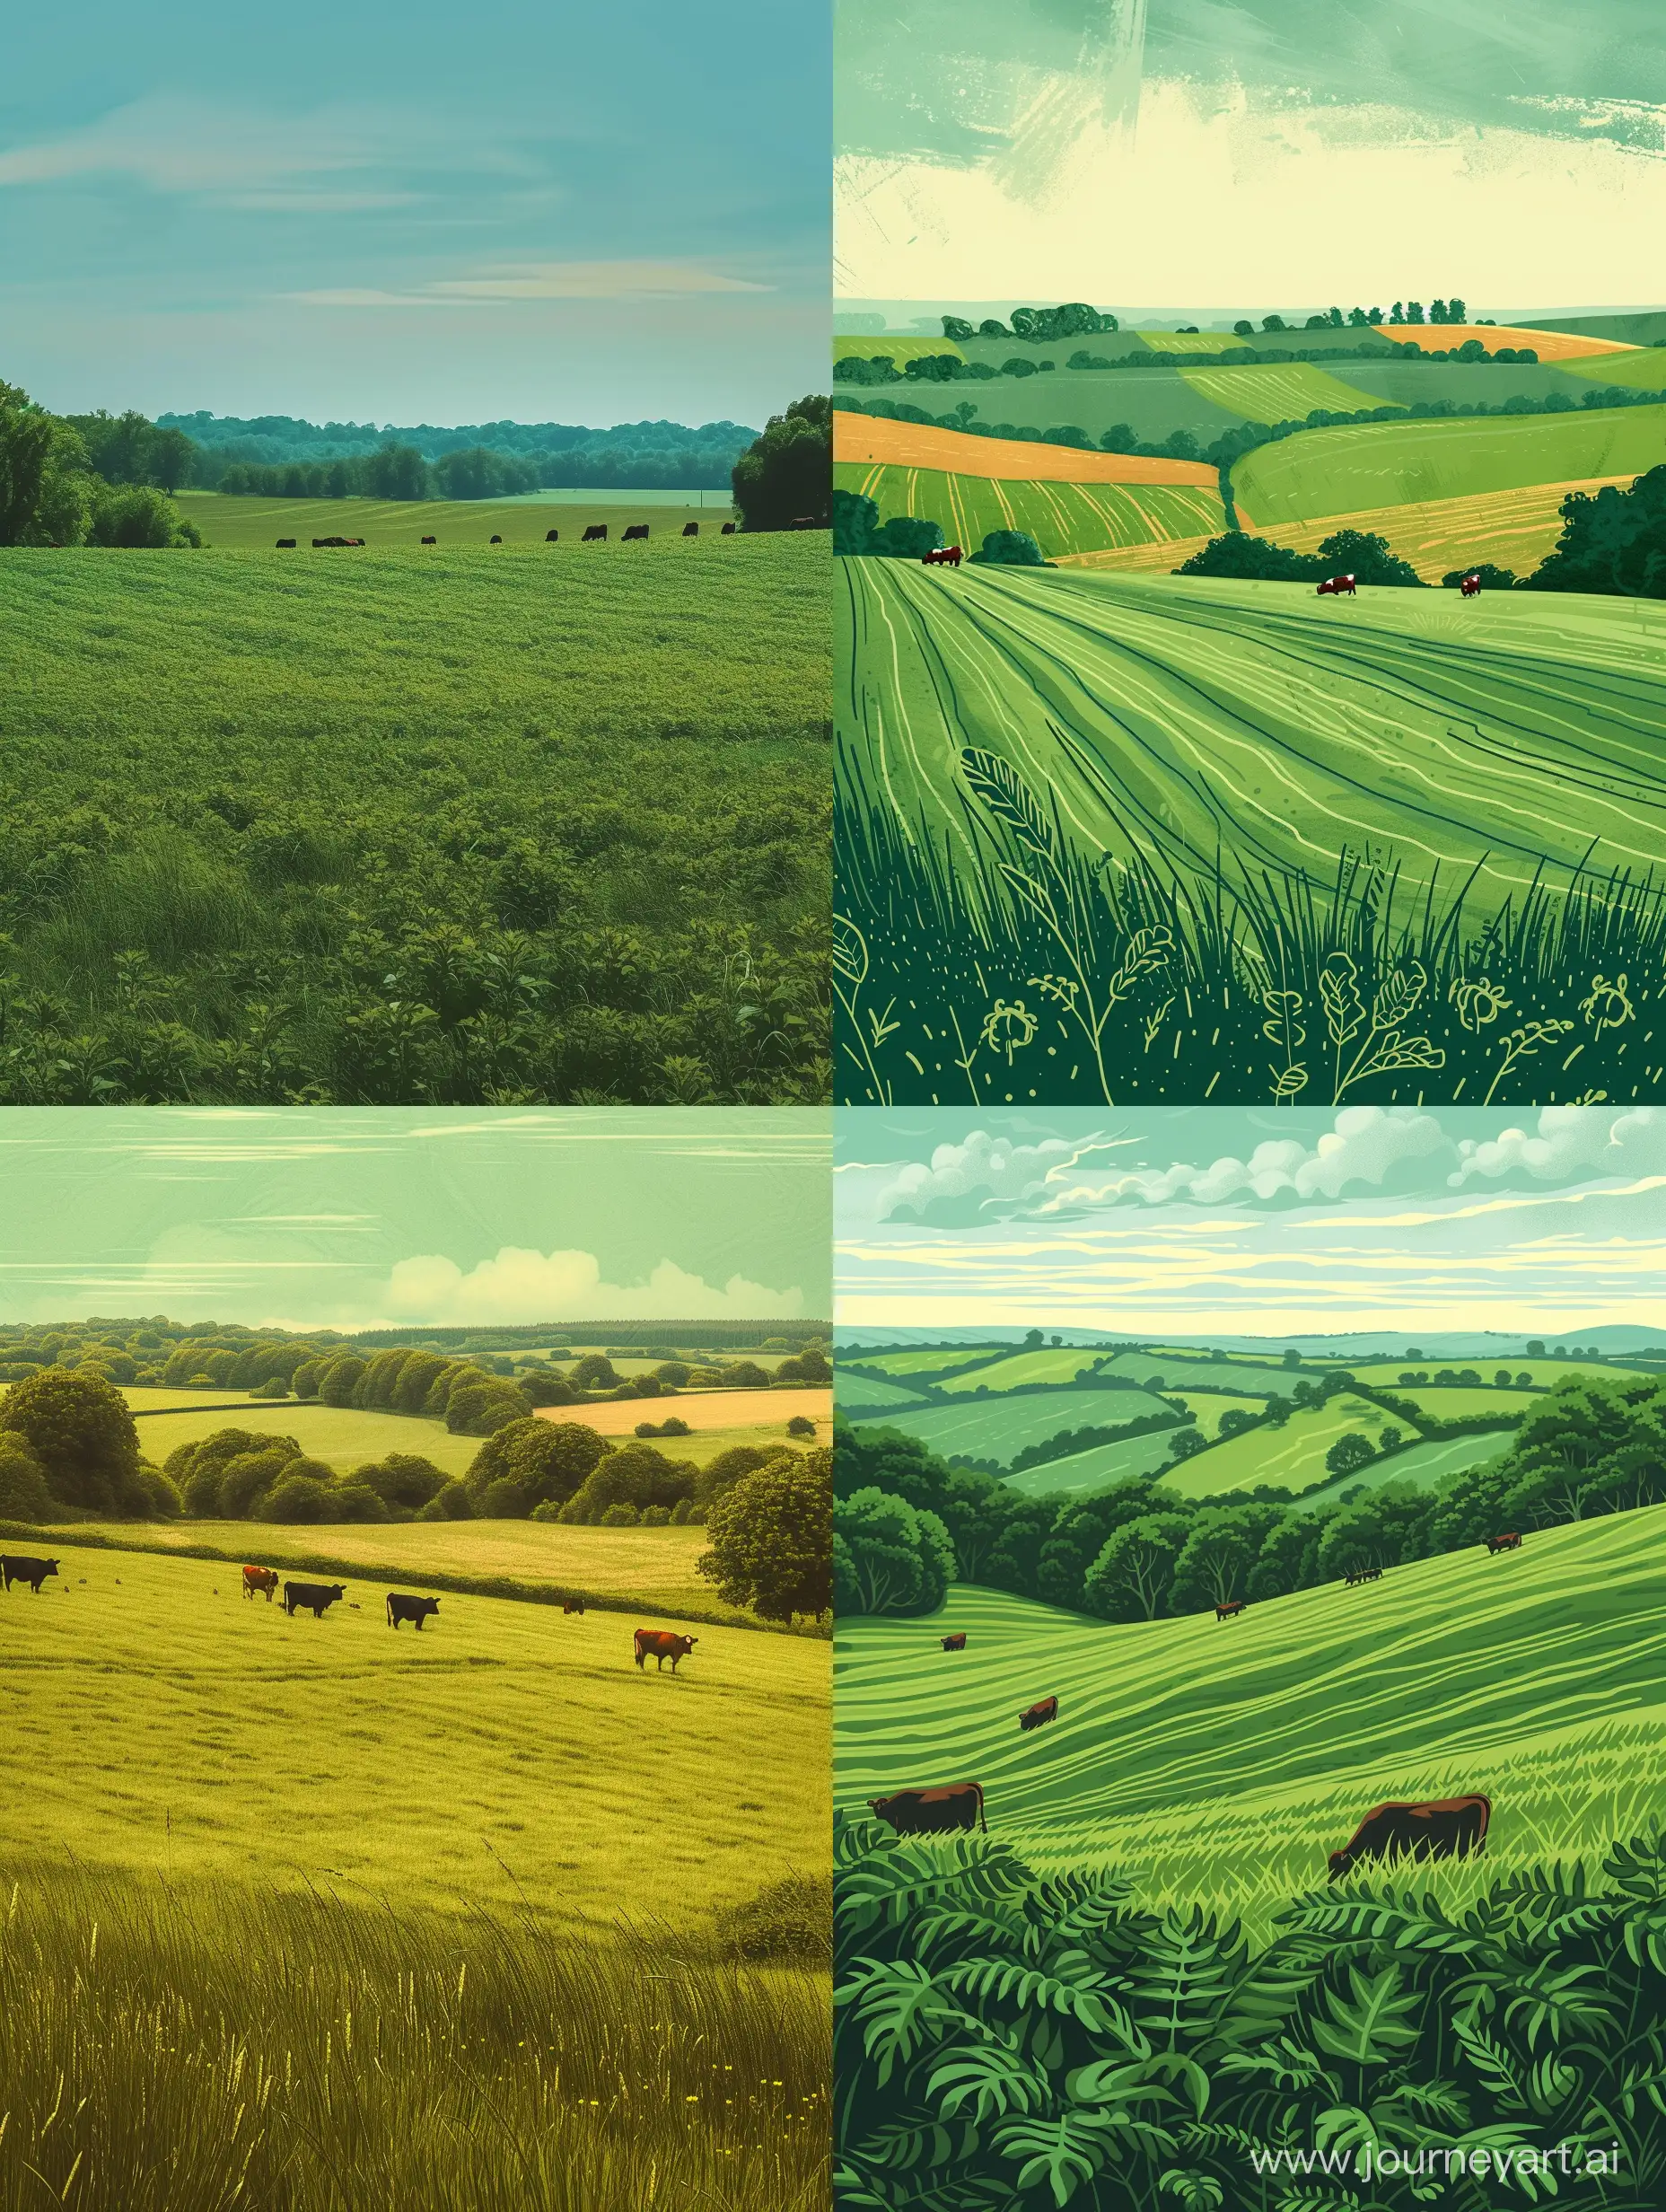 Vibrant-Green-Farm-Field-with-Cows-and-Trees-Old-Style-Illustration